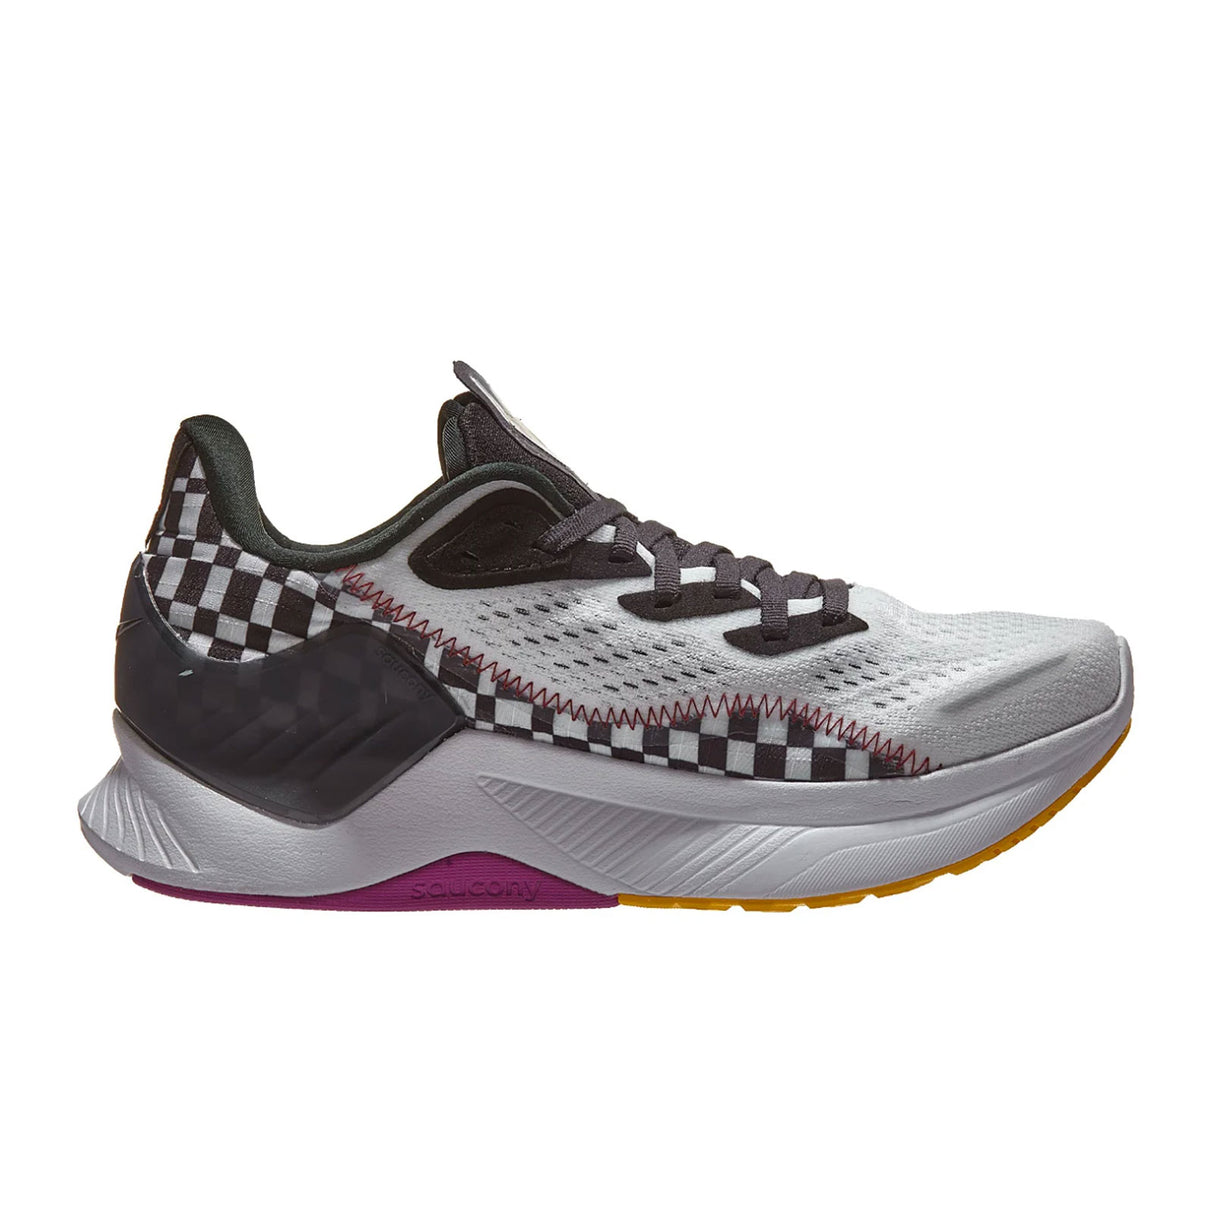 Saucony Endorphin Shift 2 Running Shoe (Women) - Reverie Athletic - Running - Stability - The Heel Shoe Fitters